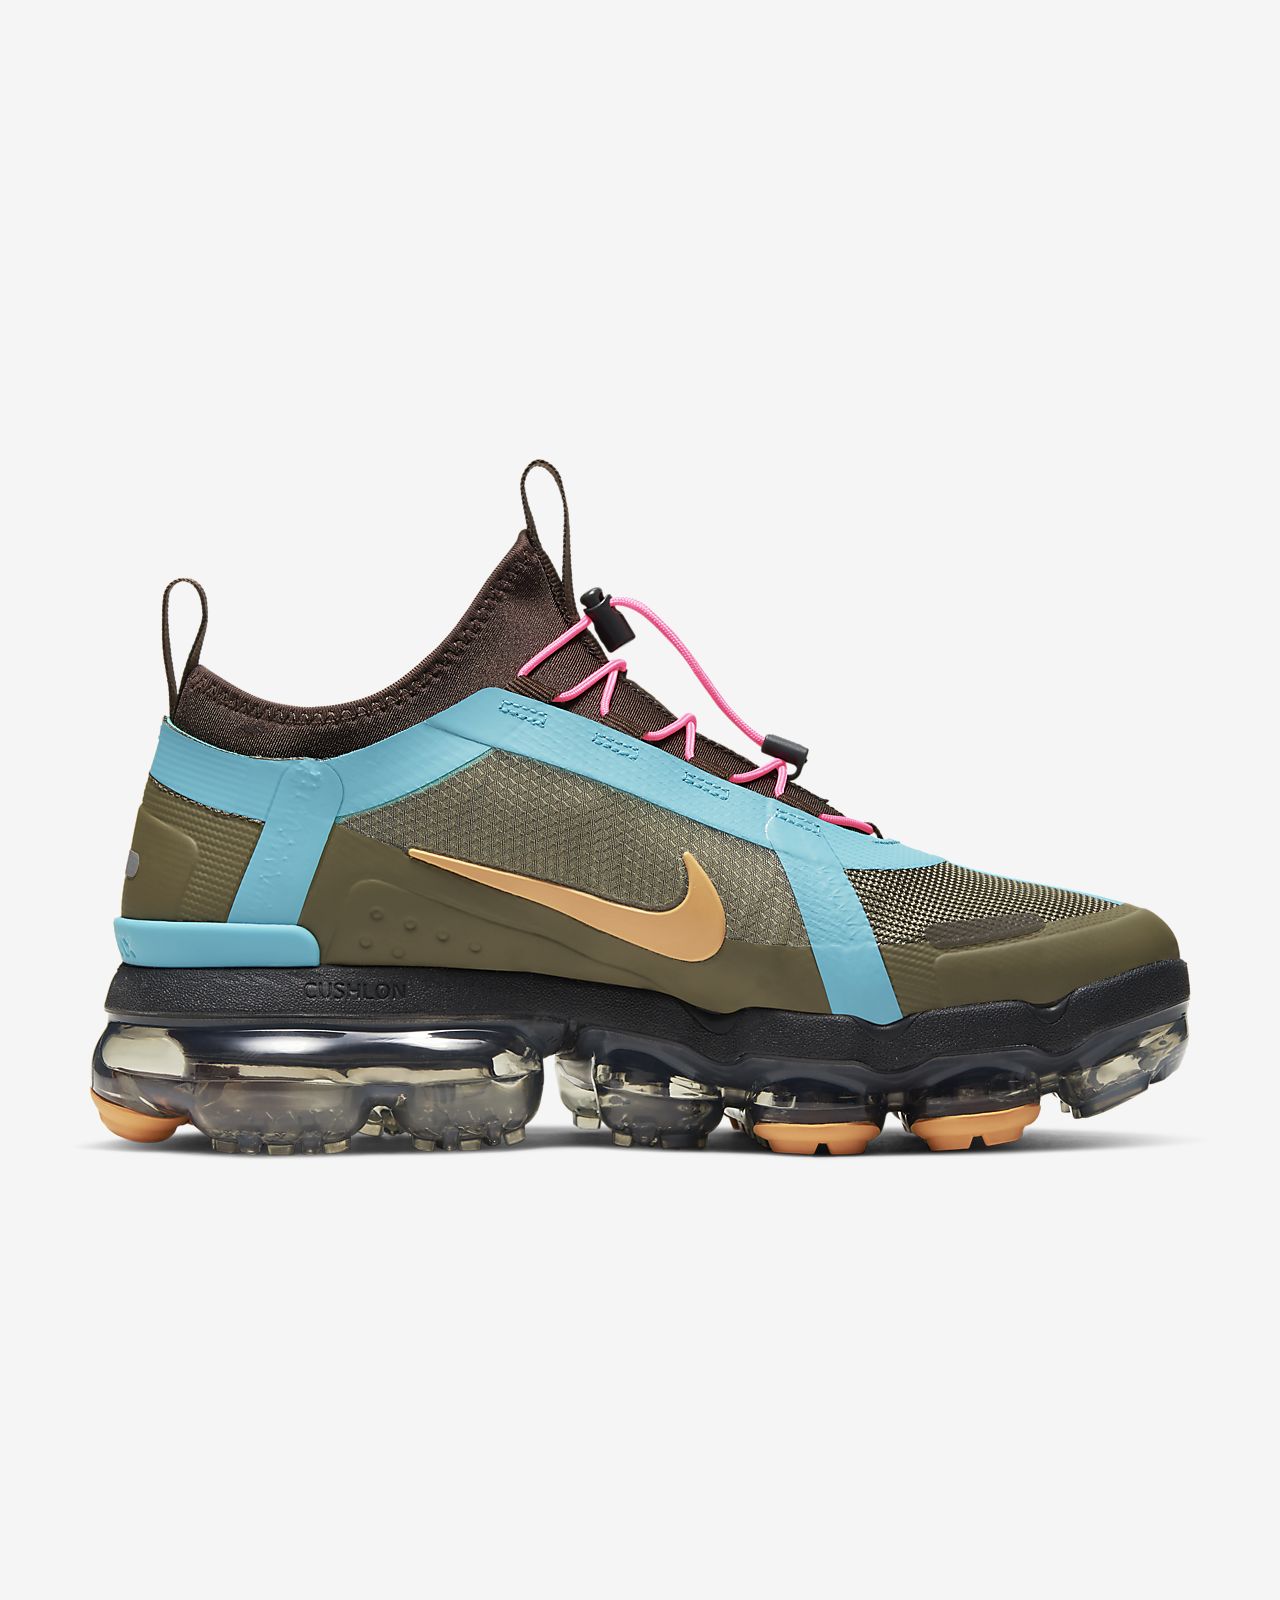 Another Nike Air VaporMax Utility JUST 